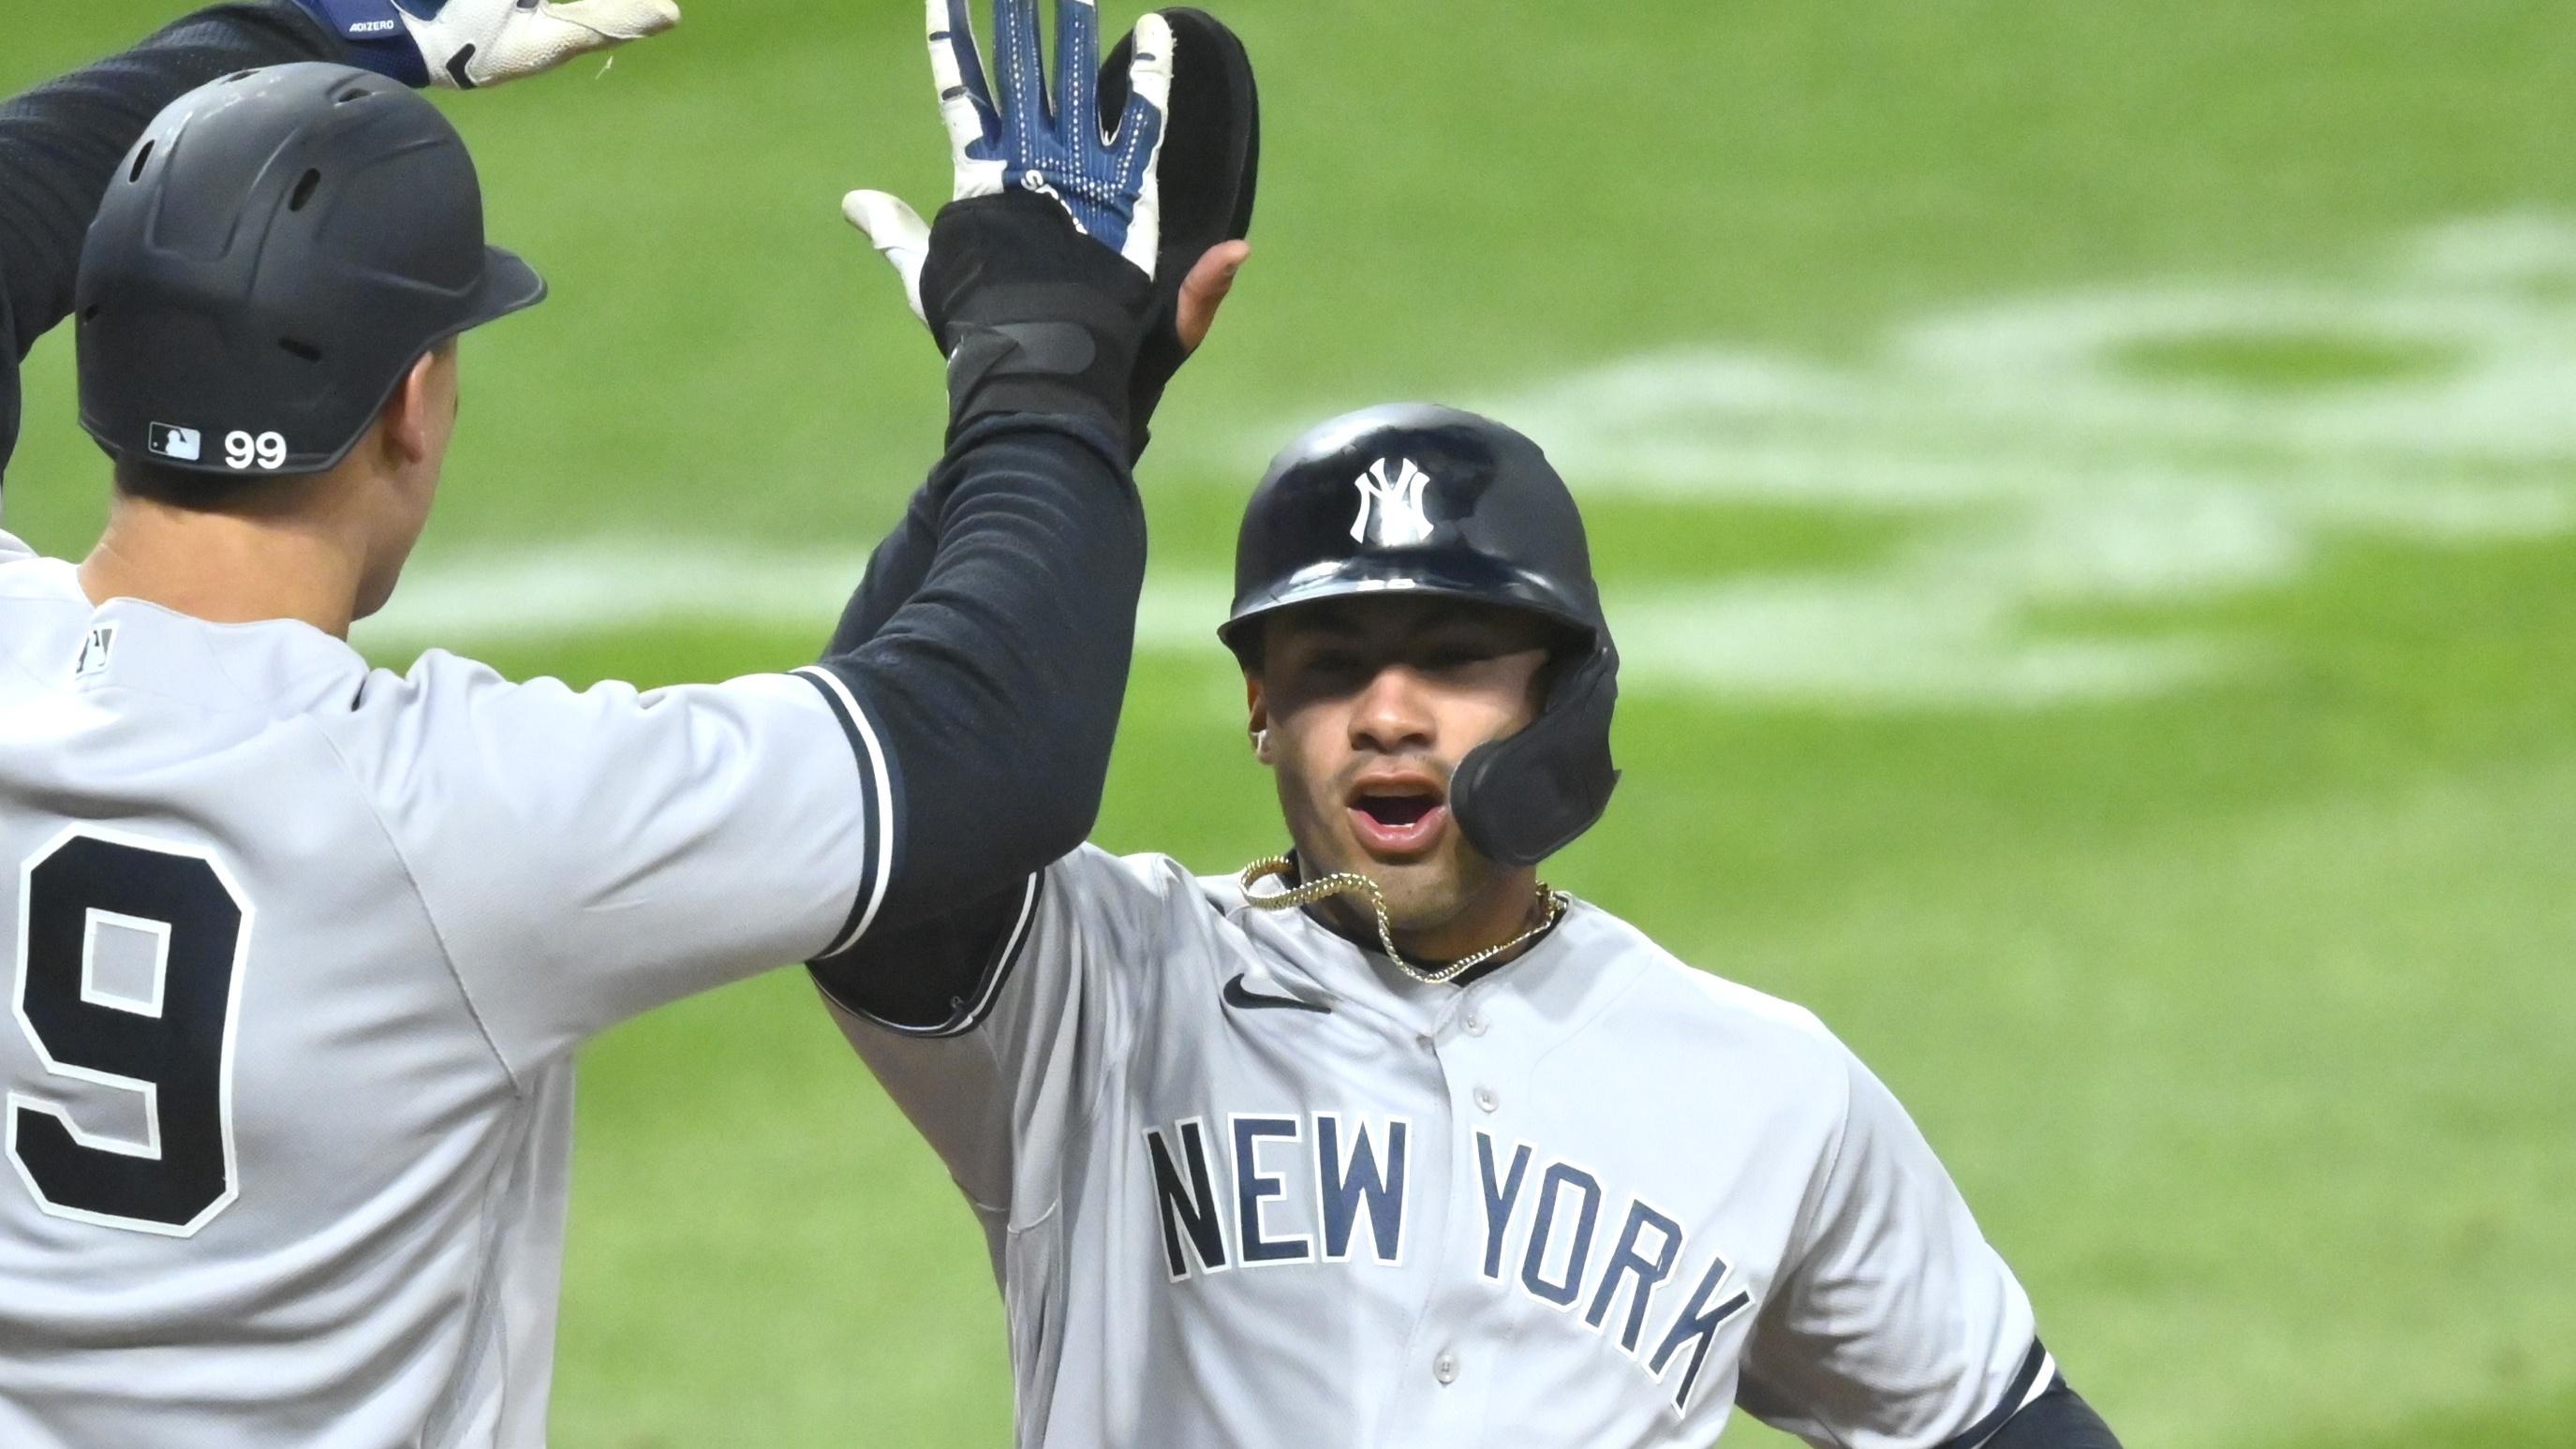 Apr 22, 2021; Cleveland, Ohio, USA; New York Yankees designated hitter Aaron Judge (99) and shortstop Gleyber Torres (25) celebrate after scoring in the seventh inning against the Cleveland Indians at Progressive Field. Mandatory Credit: David Richard-USA TODAY Sports / © David Richard-USA TODAY Sports